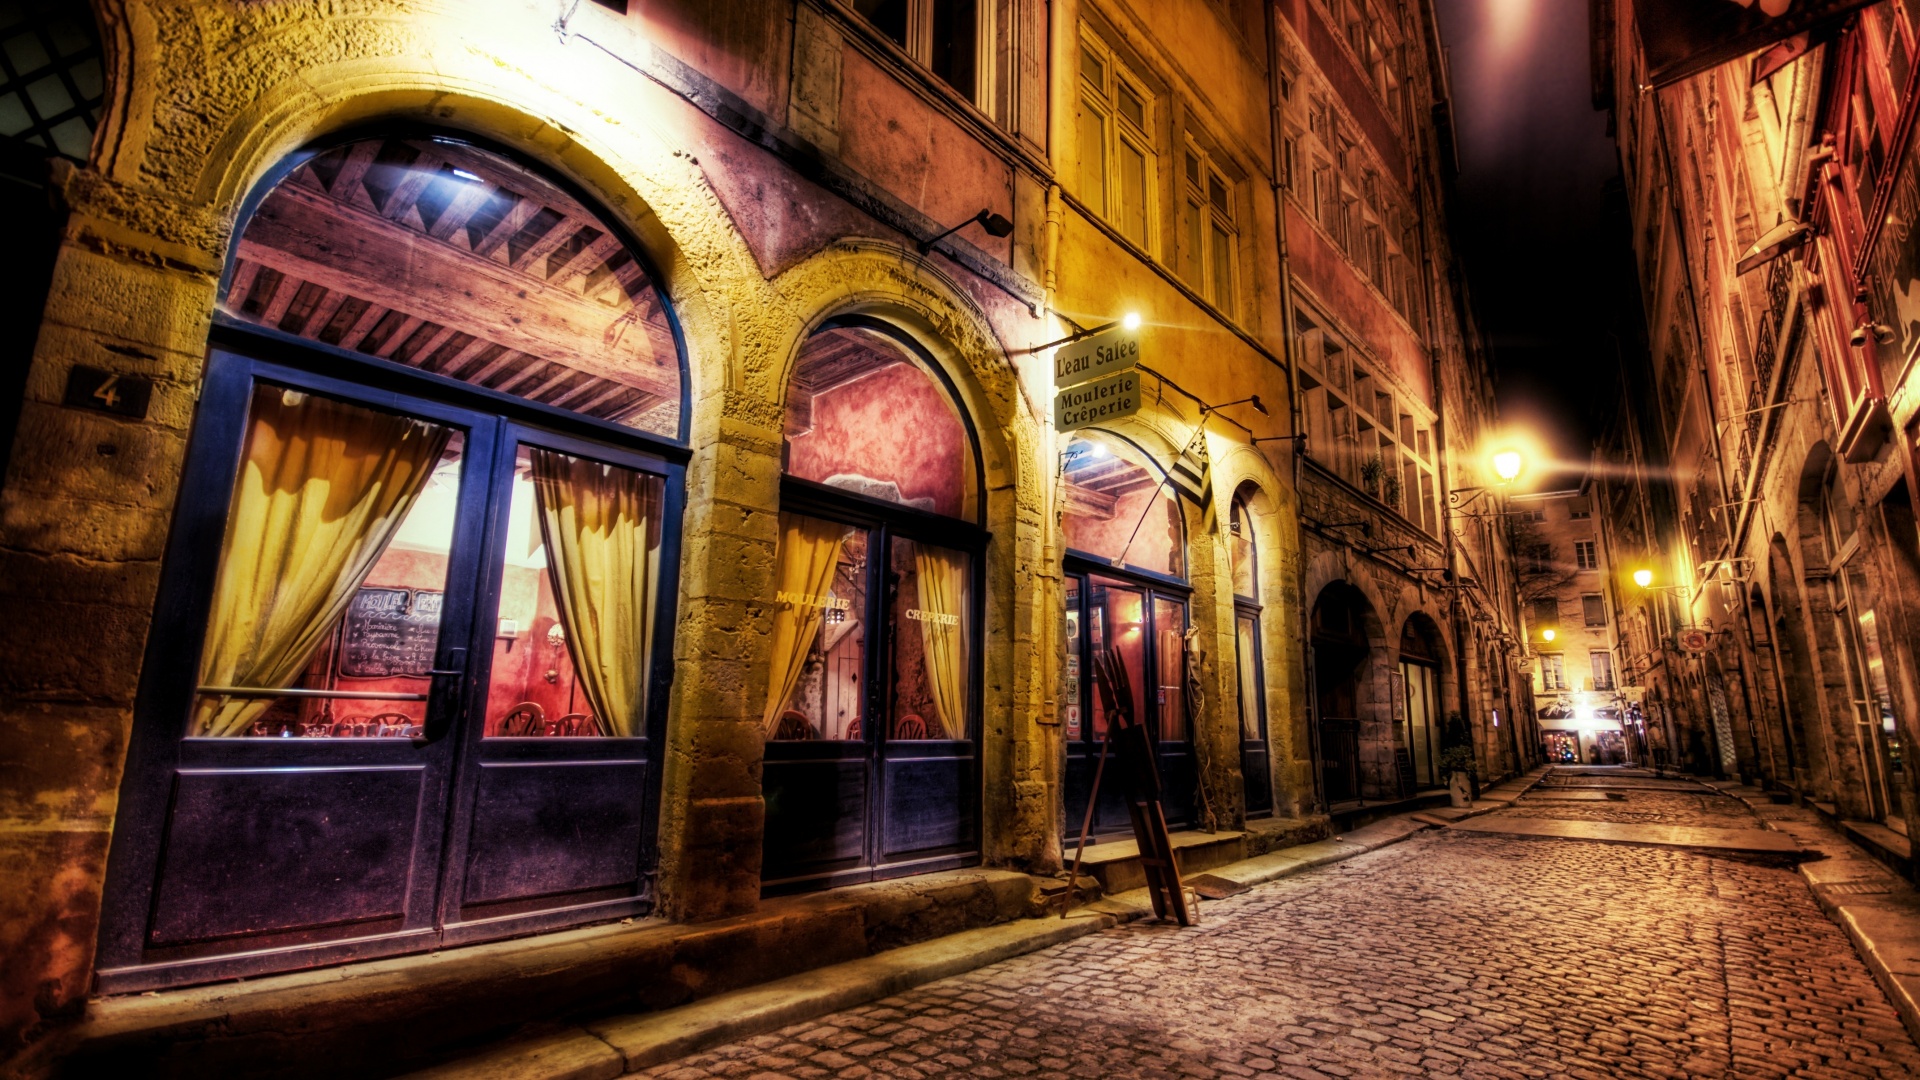 Night On A Side Street In Paris HDr Wallpaper